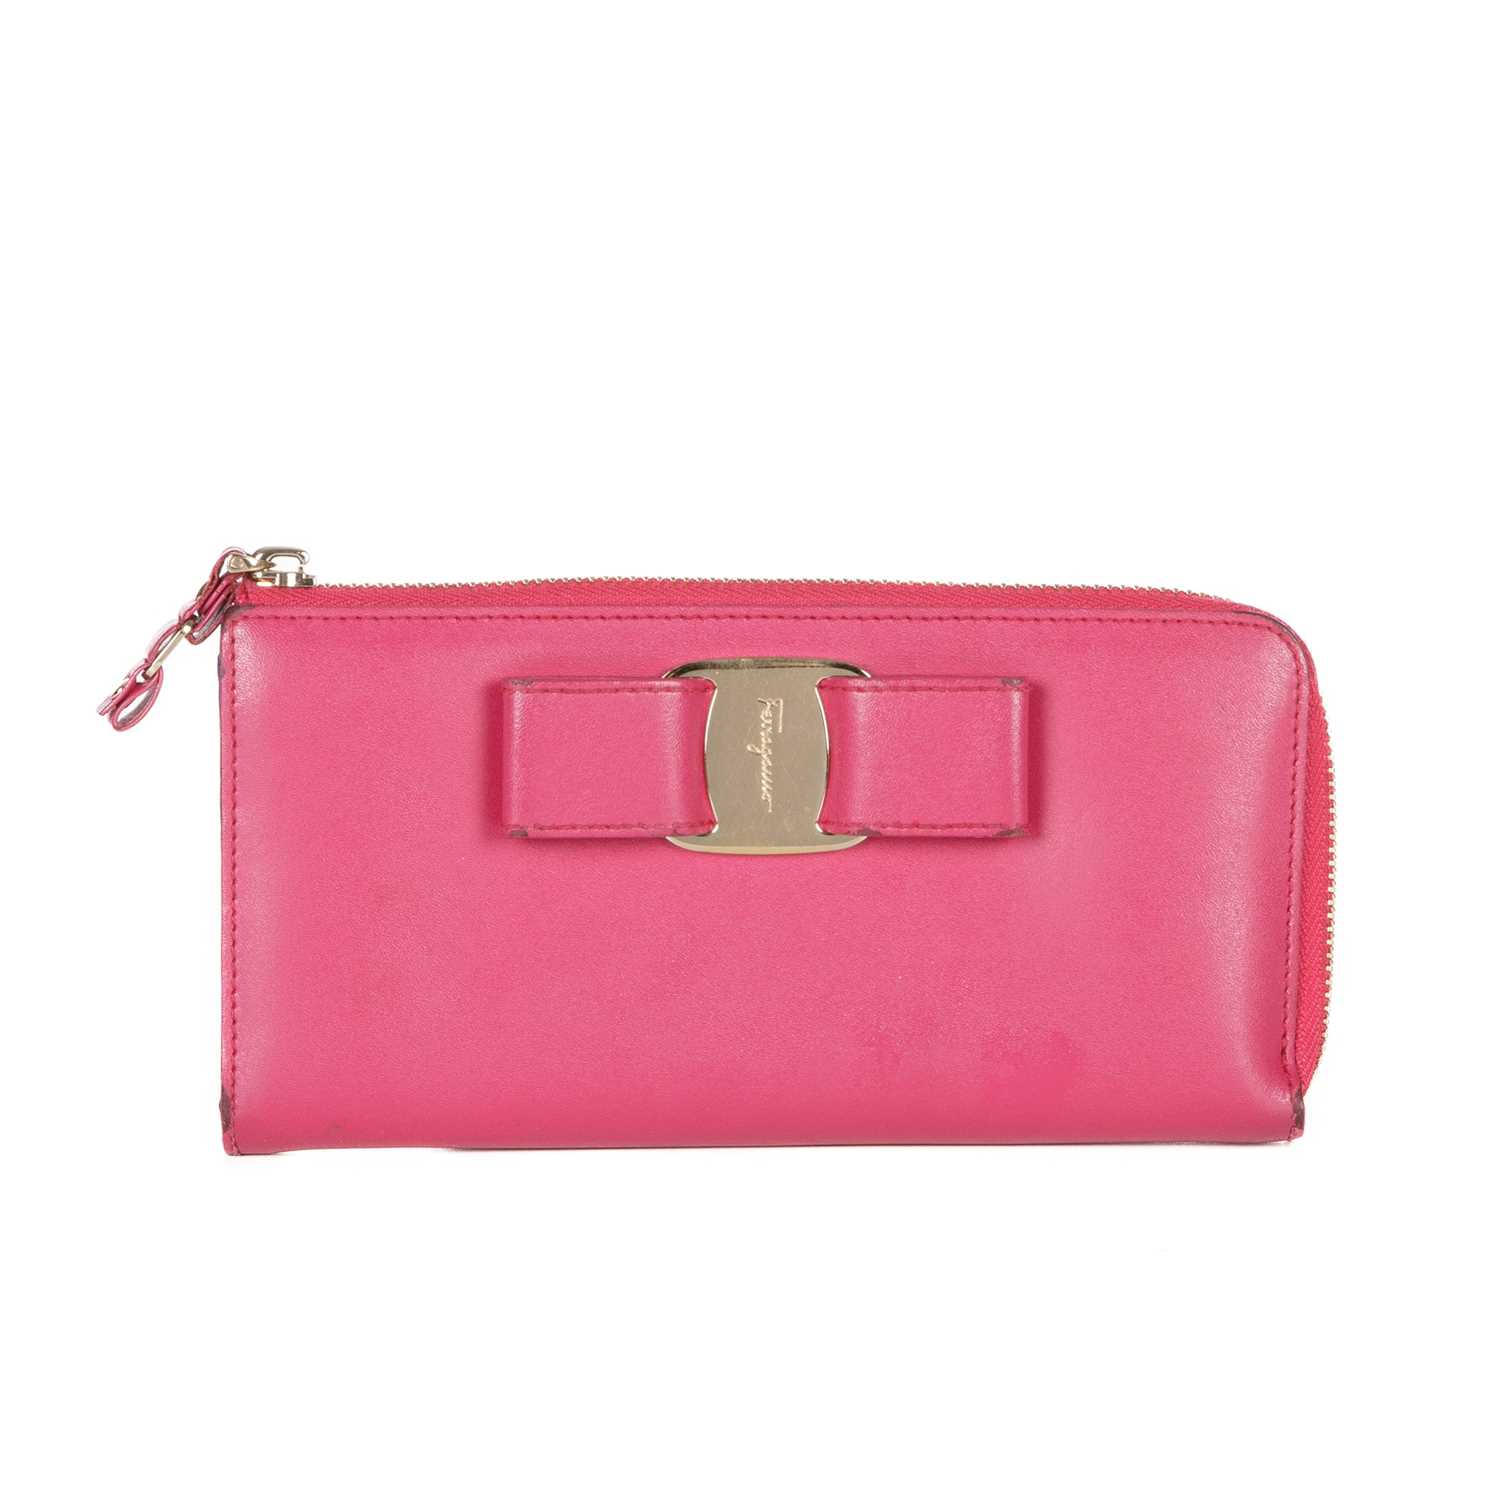 Salvatore Ferragamo, a Vara Bow long wallet, crafted from smooth fuchsia pink leather, featuring